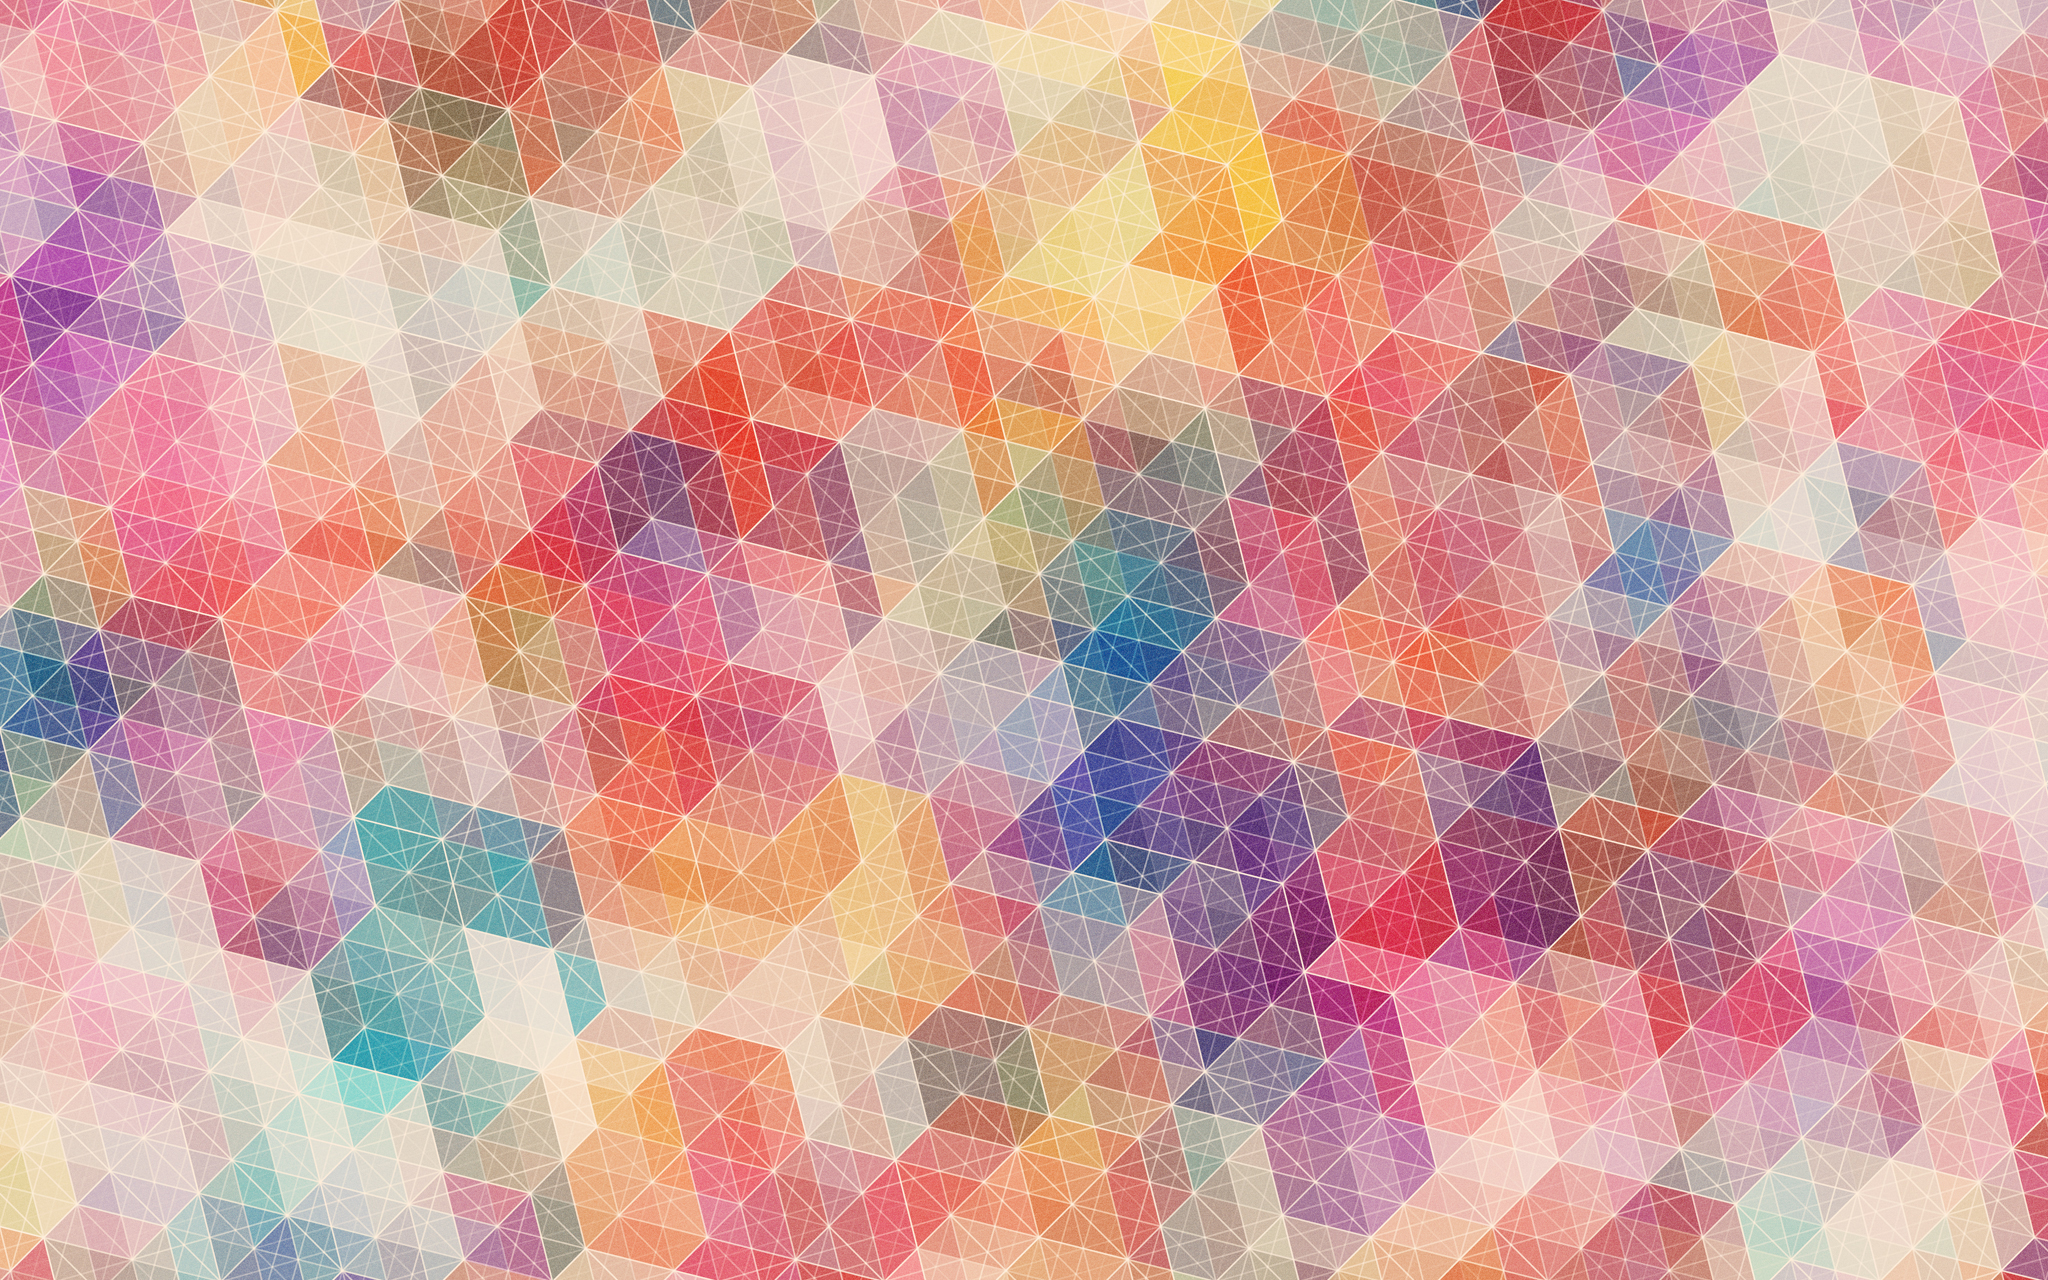 Abstract Artistic 2048x1280